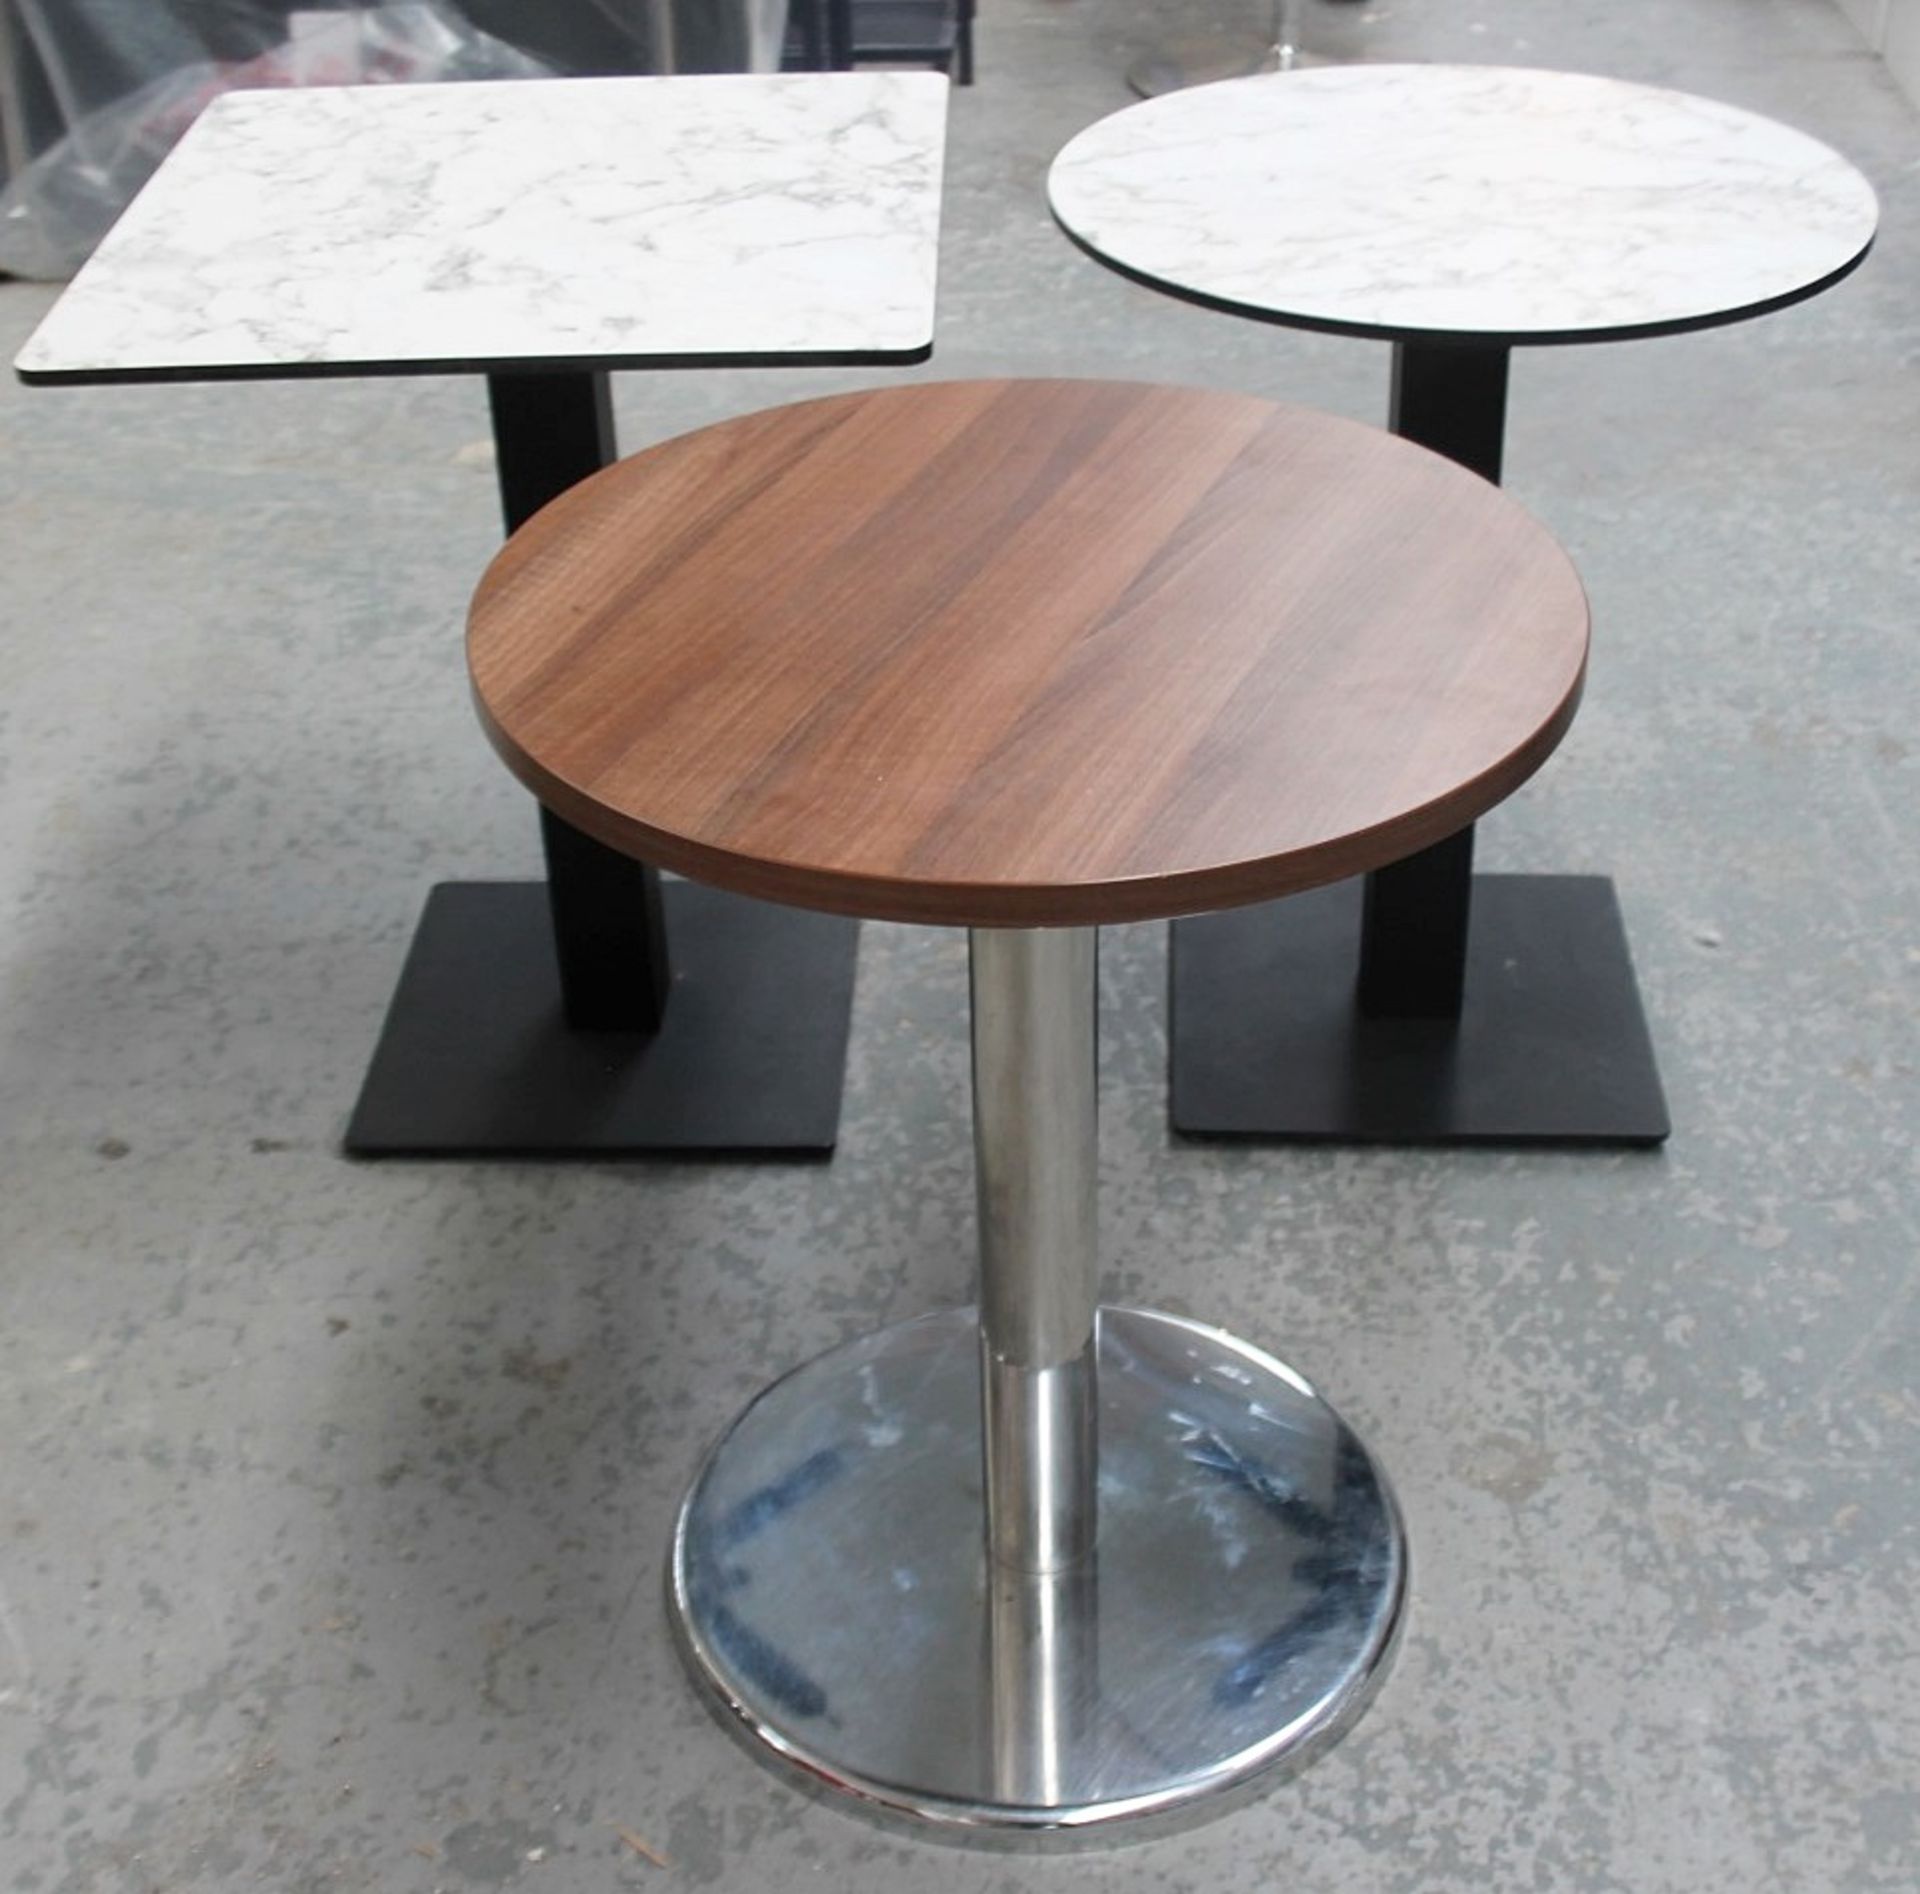 3 x Assorted Bistro Tables With Fixed Robust Metal Bases - CL987 - Ref: G/IT - Location: